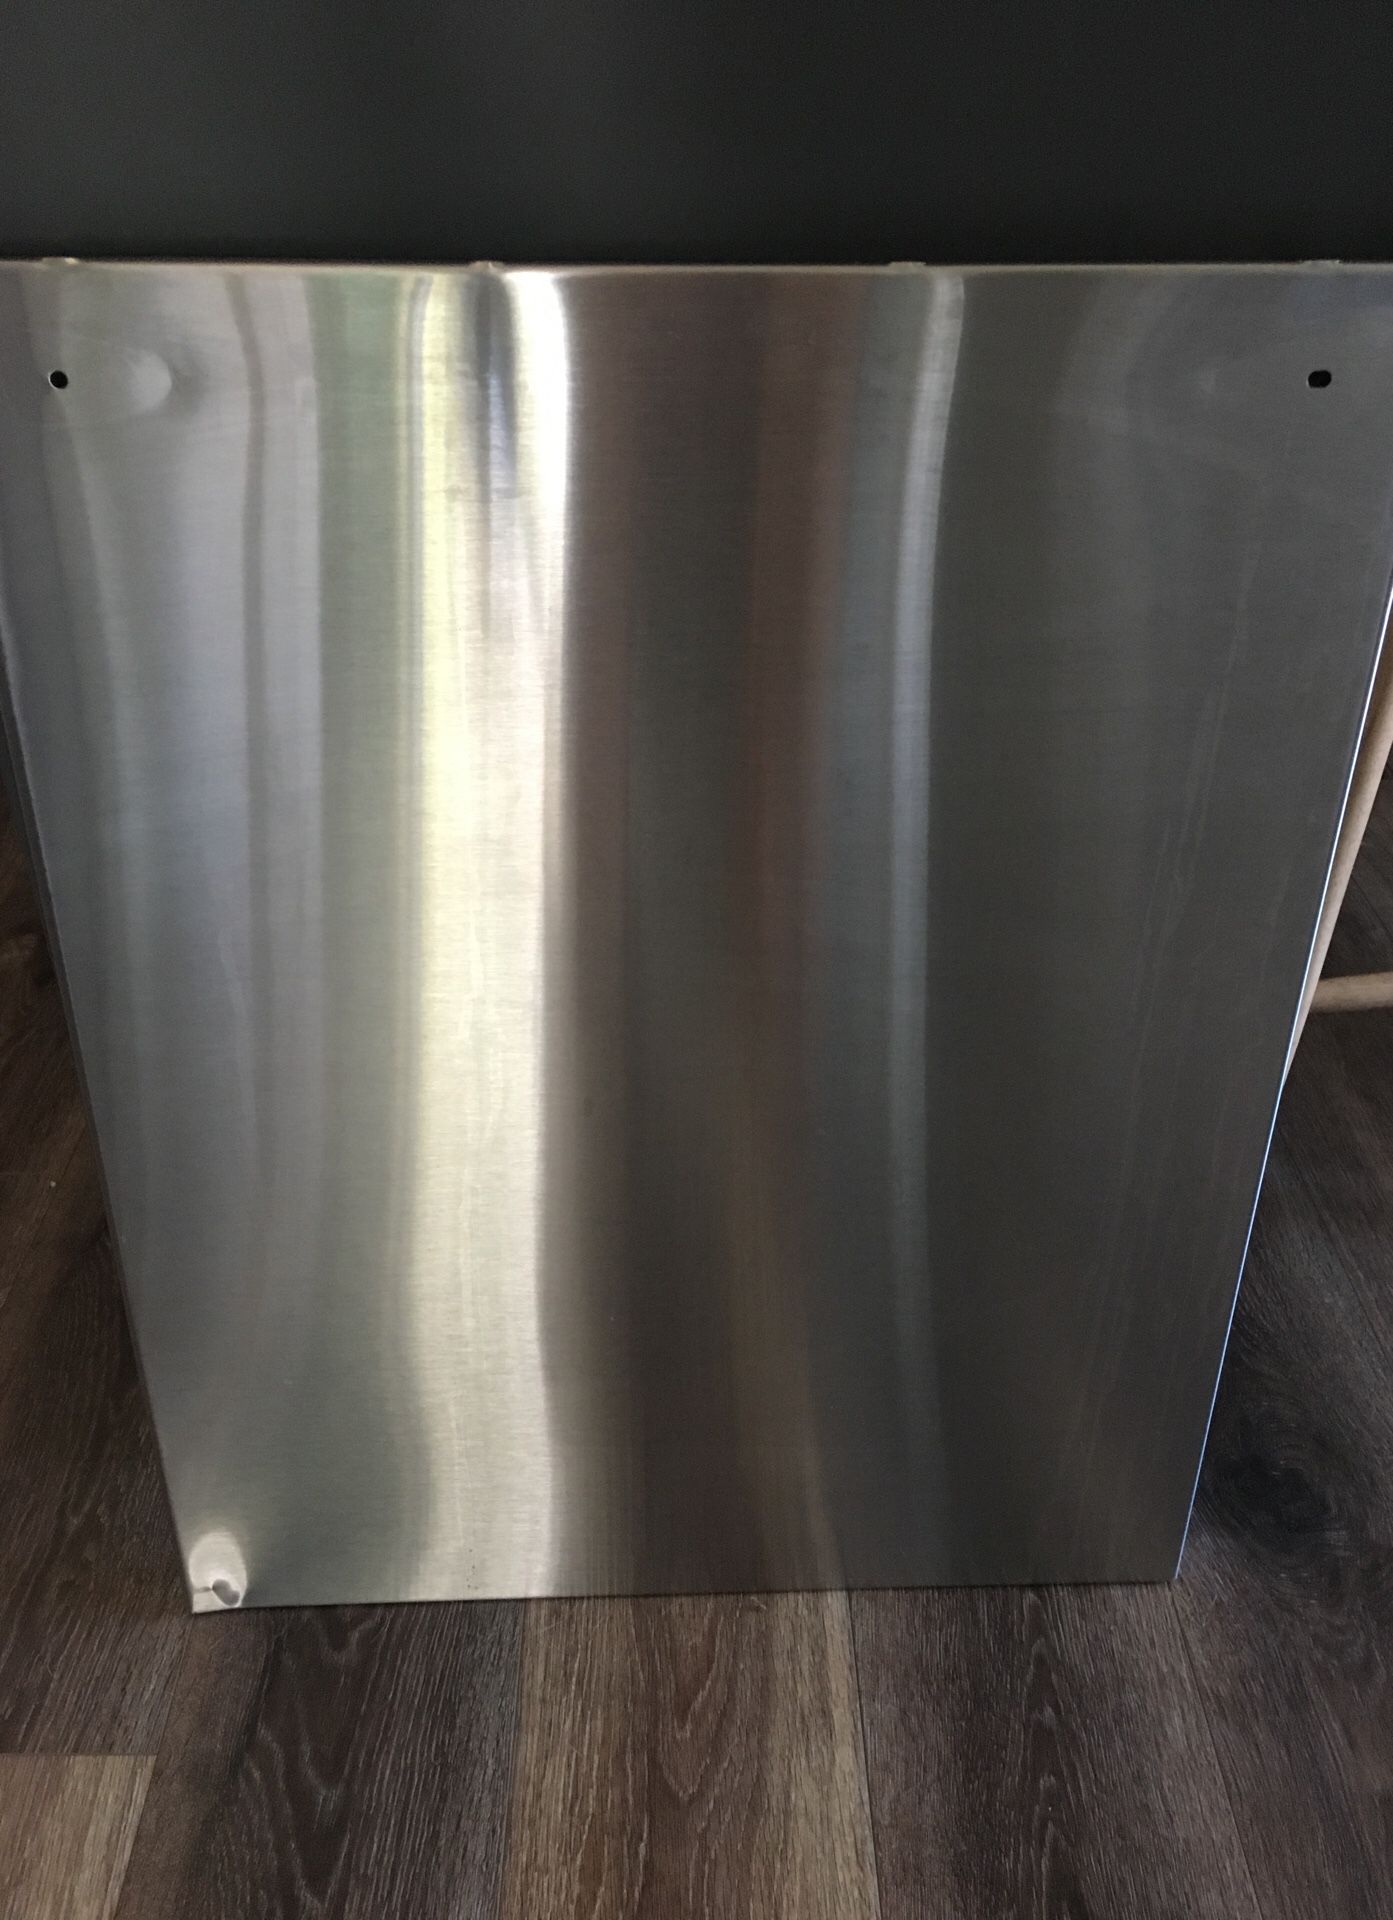 Stainless steel cover for a fridgidaire dishwasher